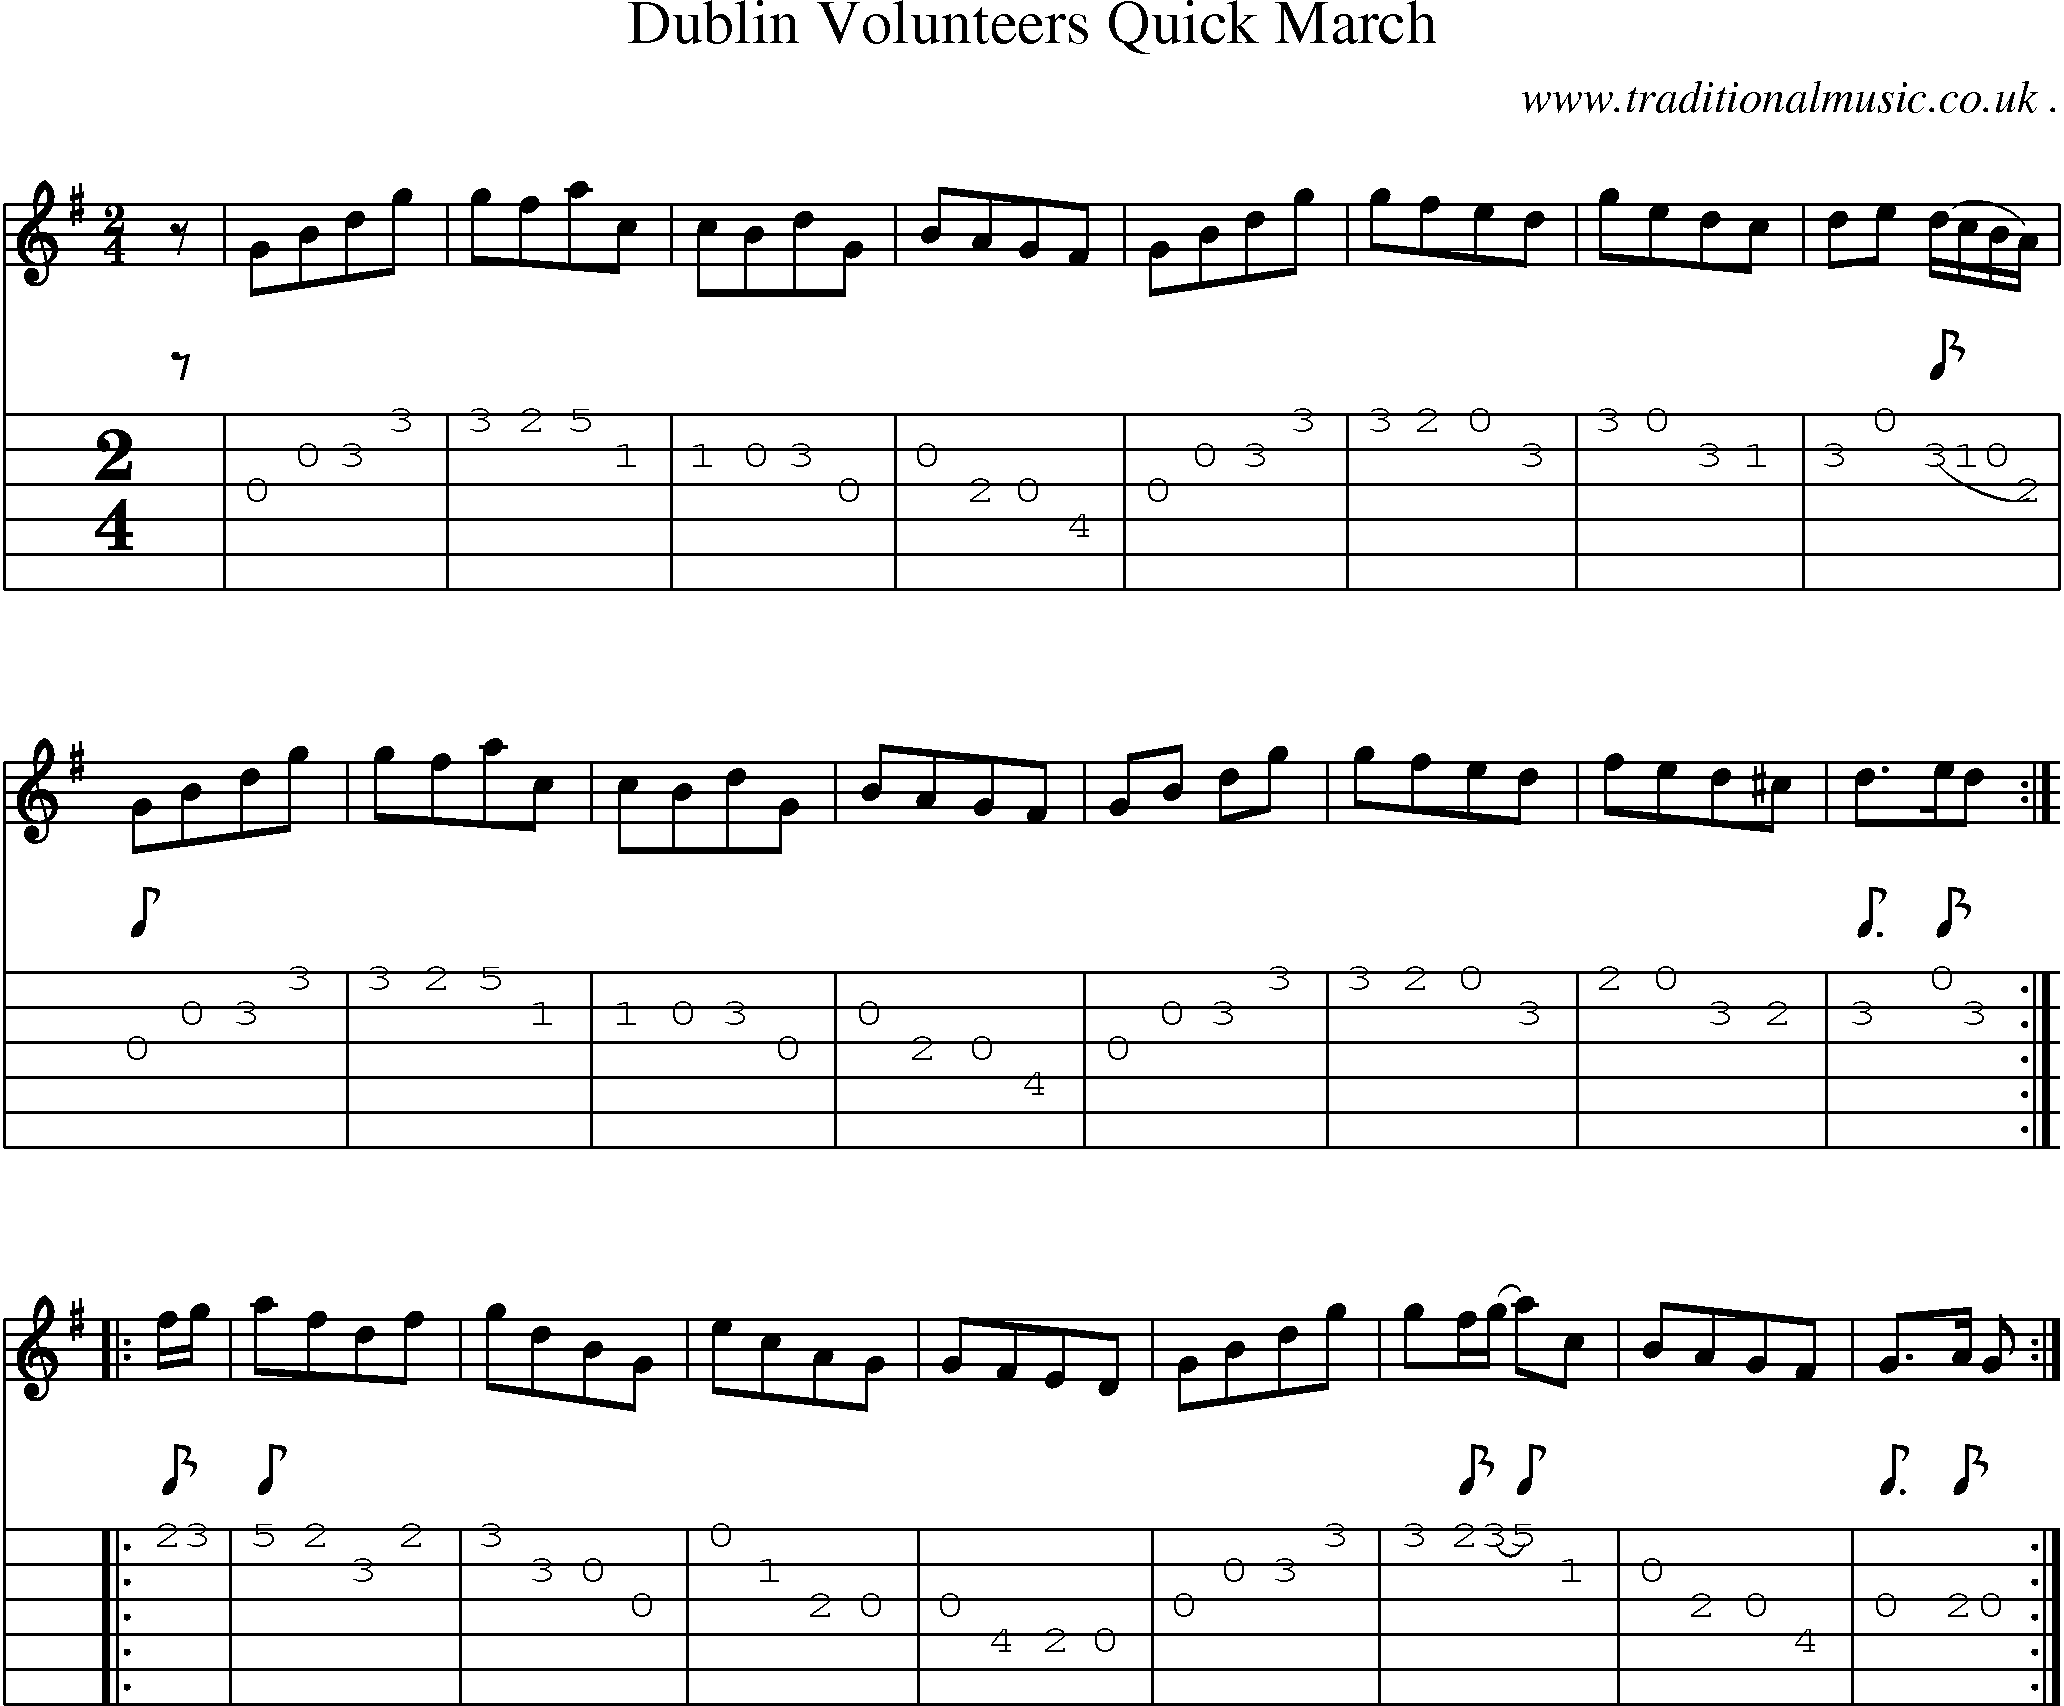 Sheet-Music and Guitar Tabs for Dublin Volunteers Quick March